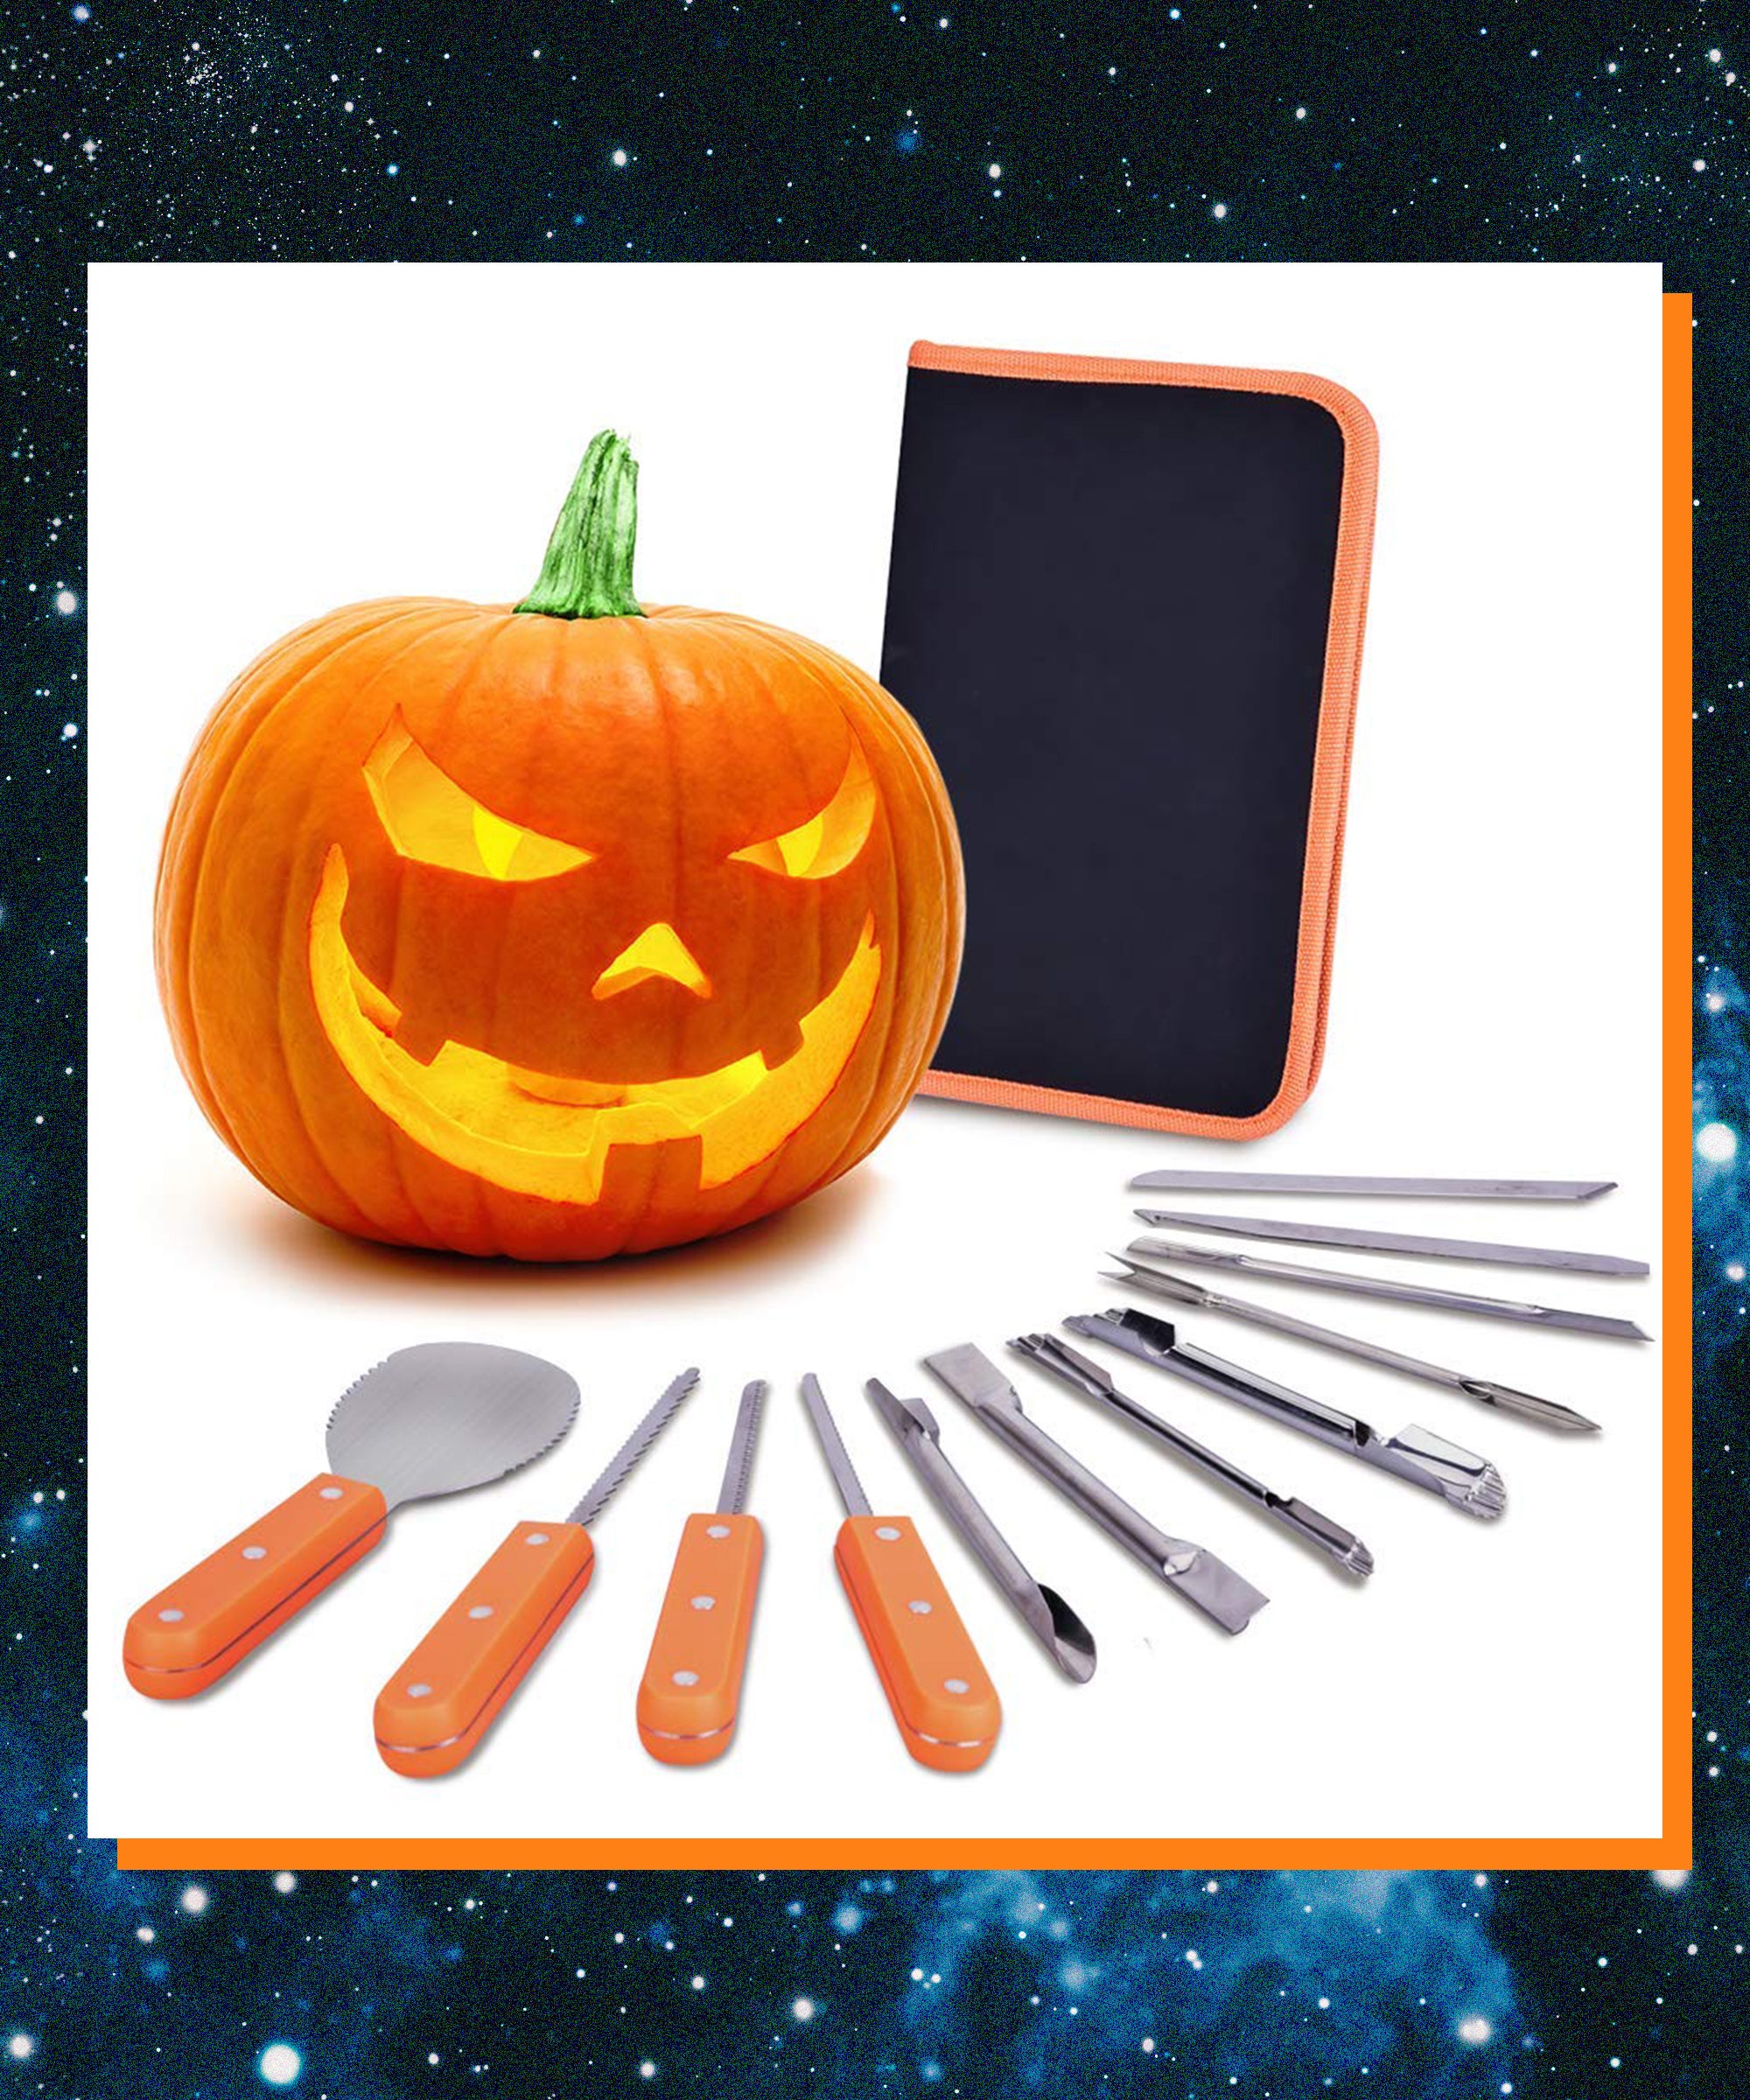 FEOAMO 11 Pieces Professional Heavy Duty Stainless Steel Jack O Lanterns Pumpkin Carving Tools Set for Halloween Kids Adults Party Decorations with Storage Carrying Bag Halloween Pumpkin Carving Kit